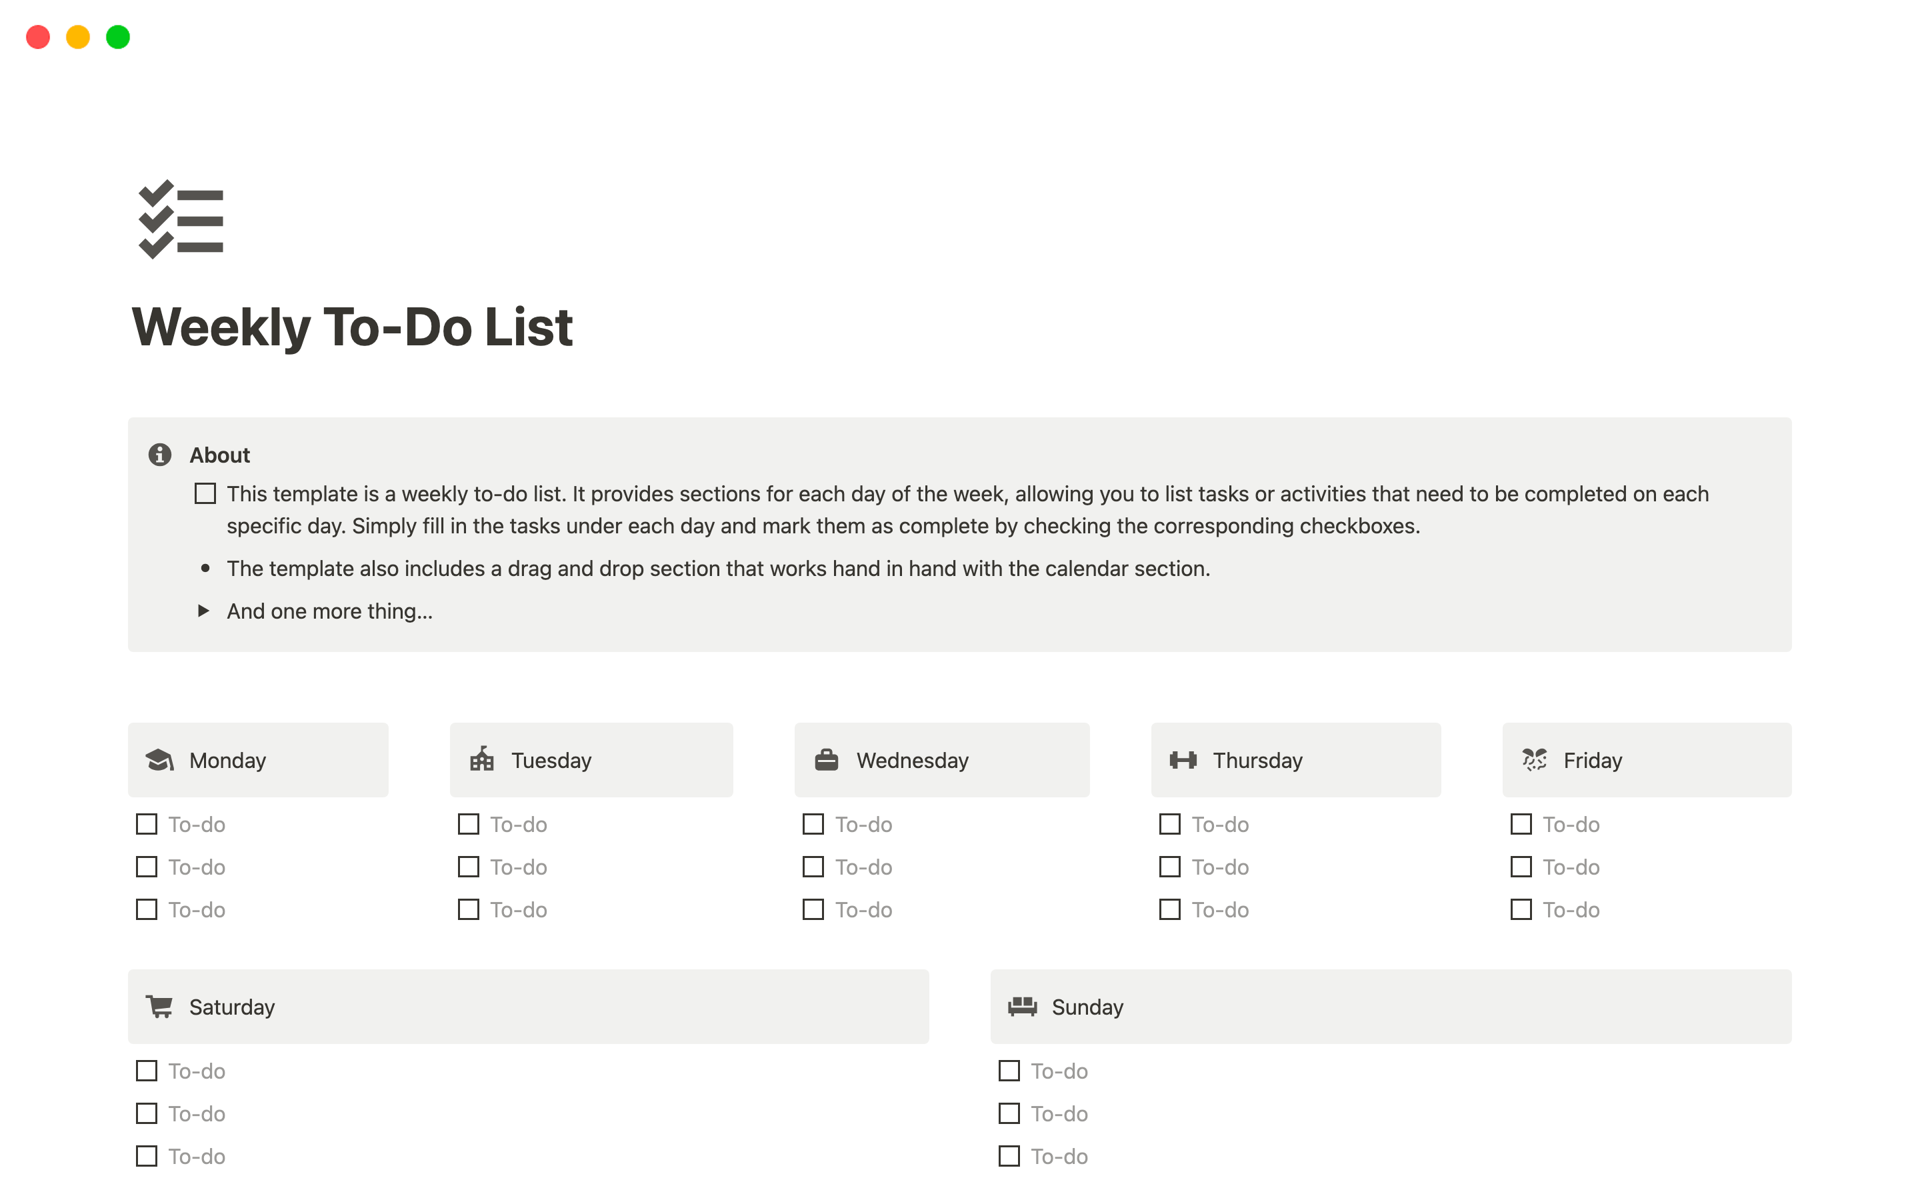 This template is designed to help you stay organized and manage your tasks and activities.